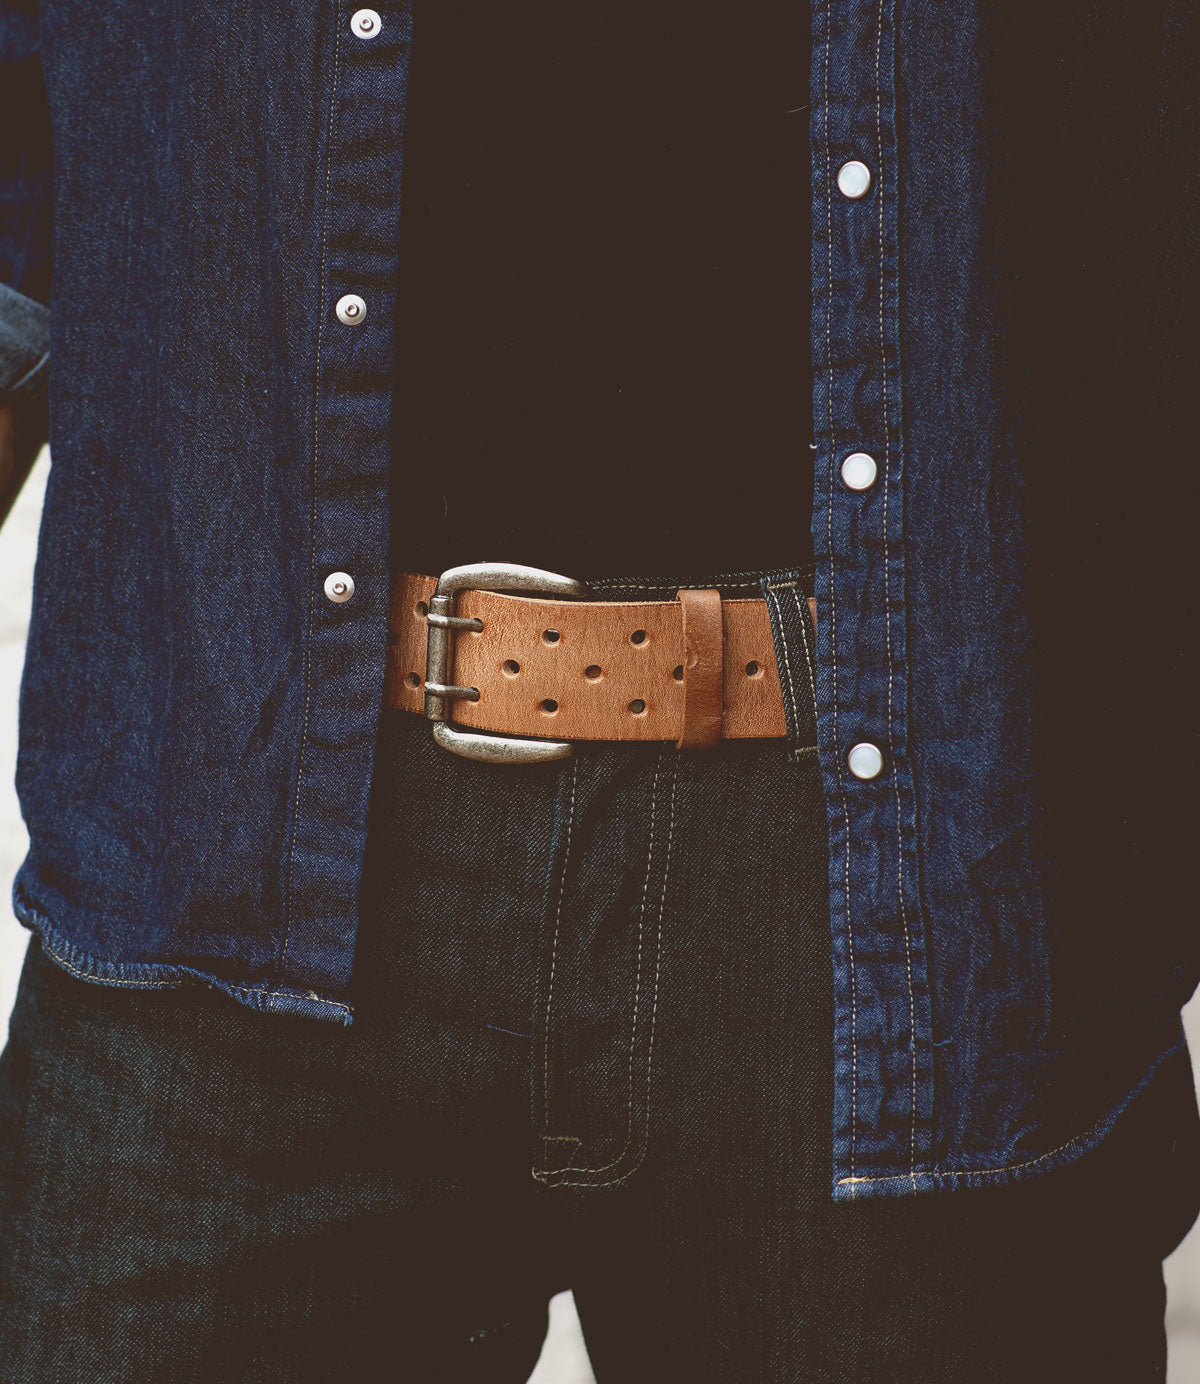 Close-up of a person wearing a denim shirt, black jeans, and a Bed Stu Mccoy brown vegetable-tanned leather belt with a silver buckle.